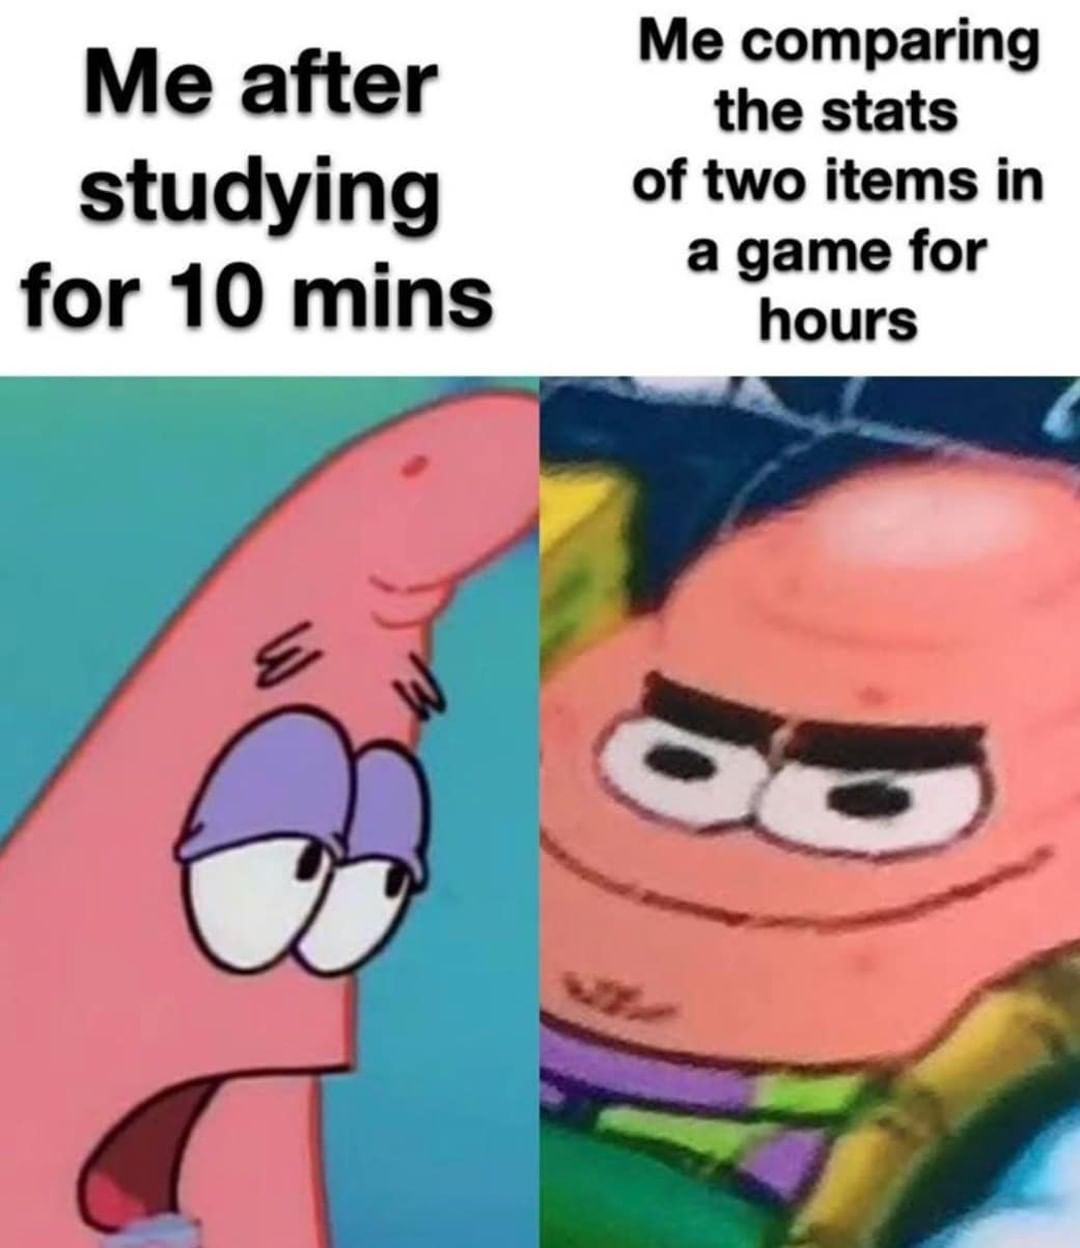 Me after studying for 10 mins. Me comparing the stats of two items in a game for hours.